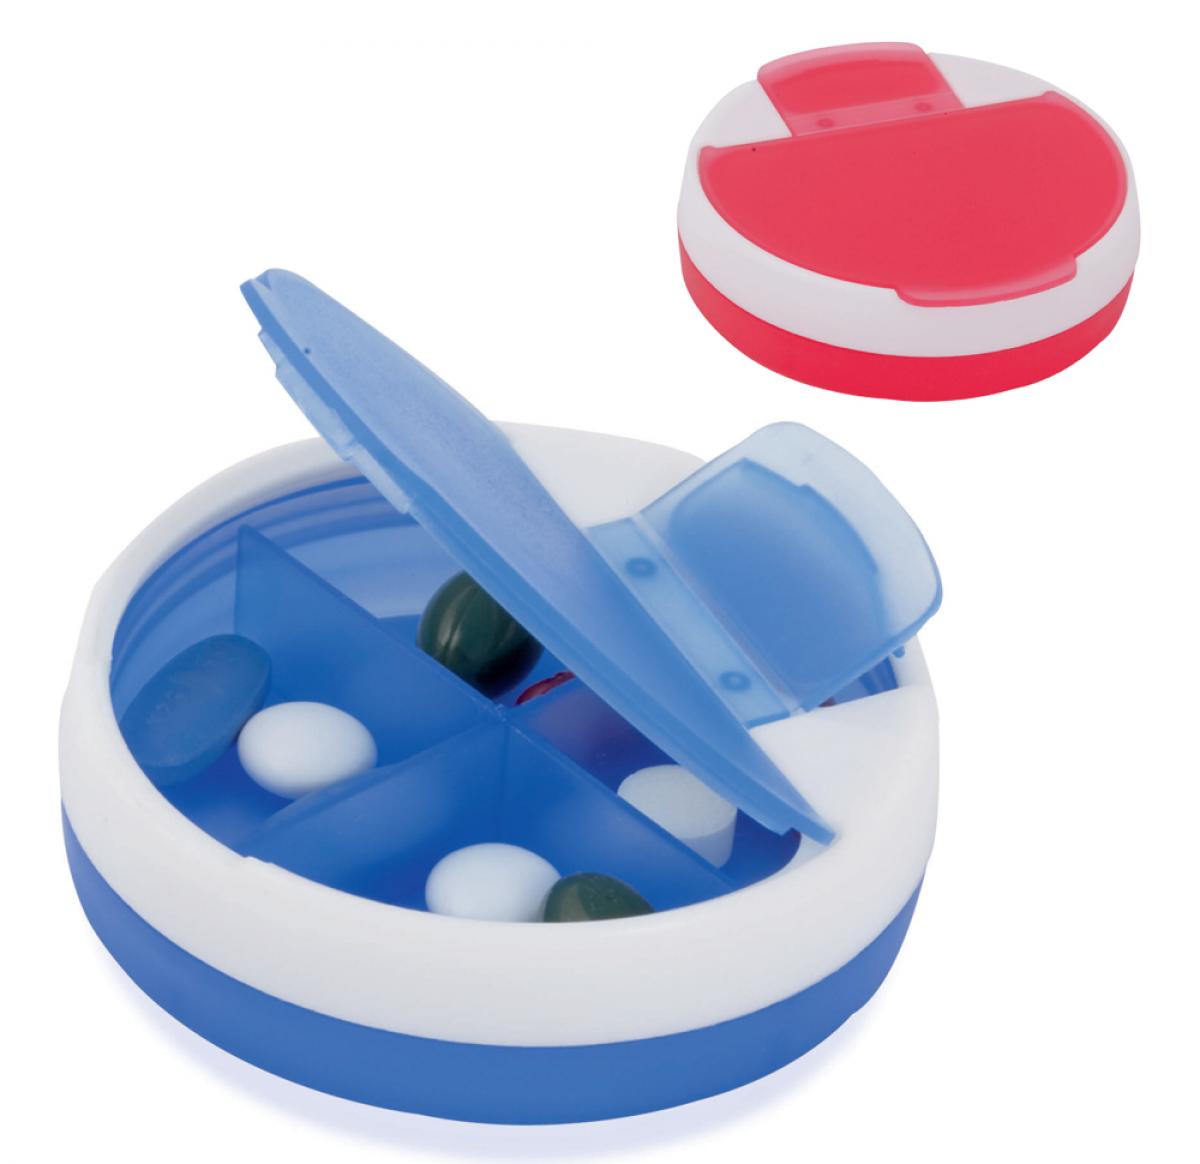 Pill Box Dispensers With Four Compartments